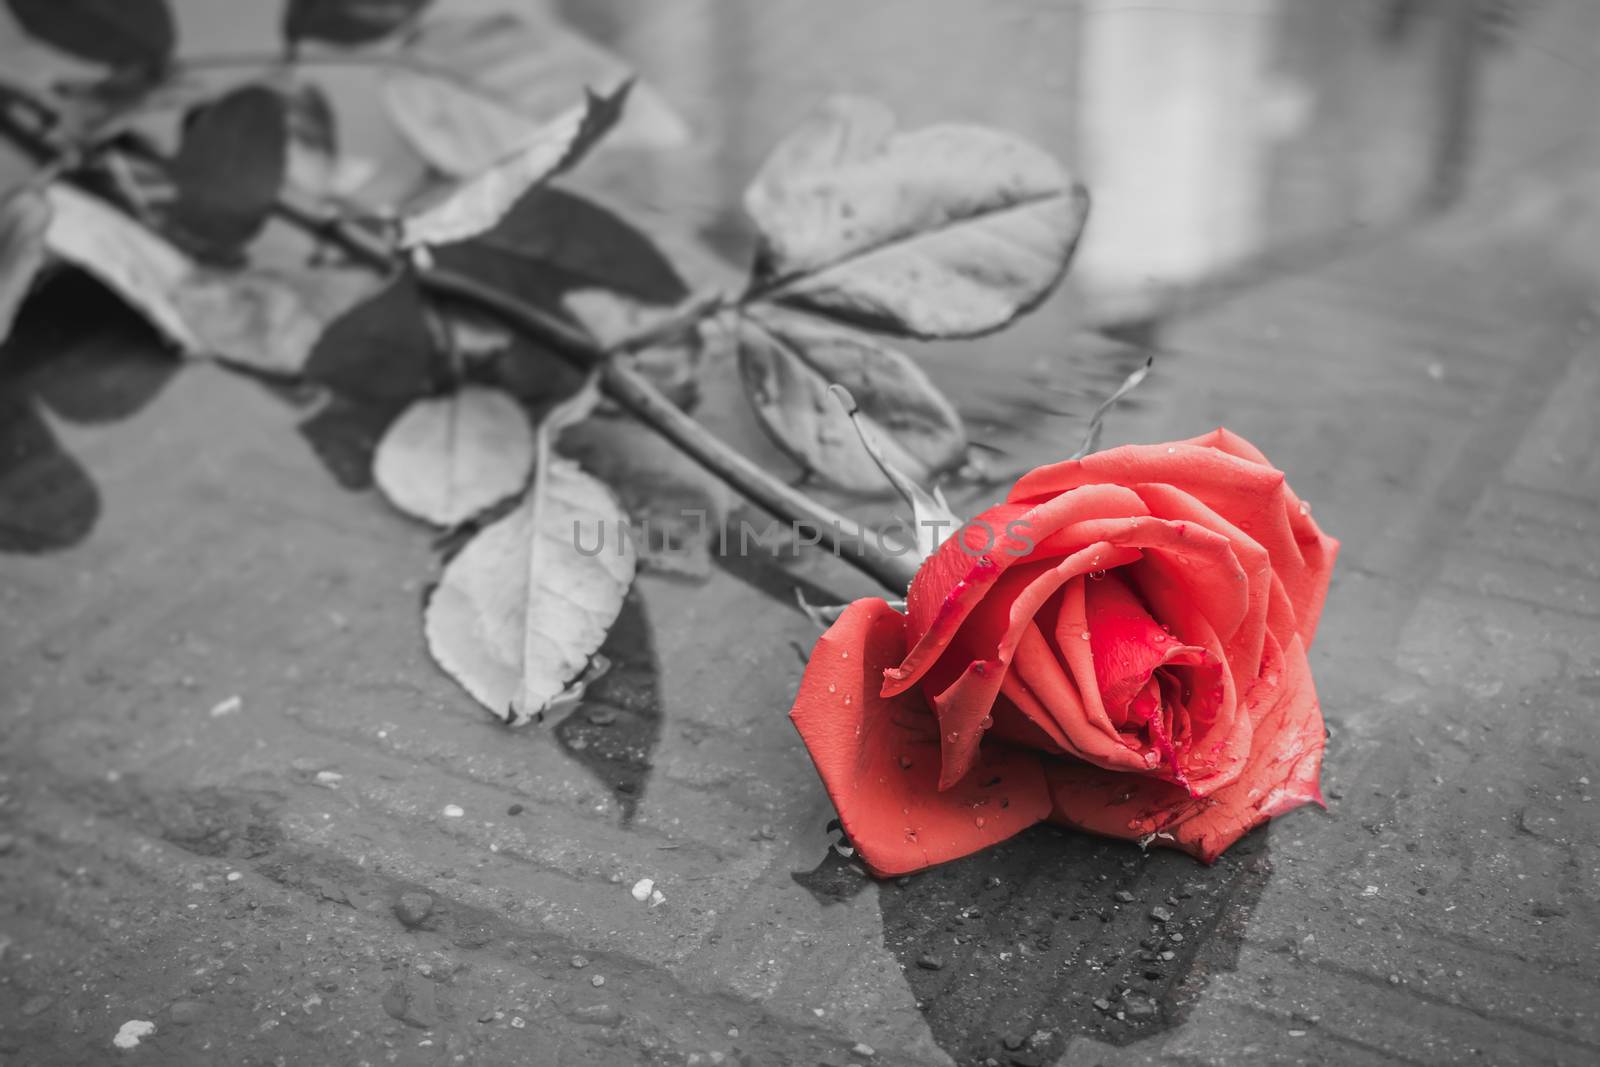 A red rose lies in a dirty puddle on the road, thrown by someone after the rain